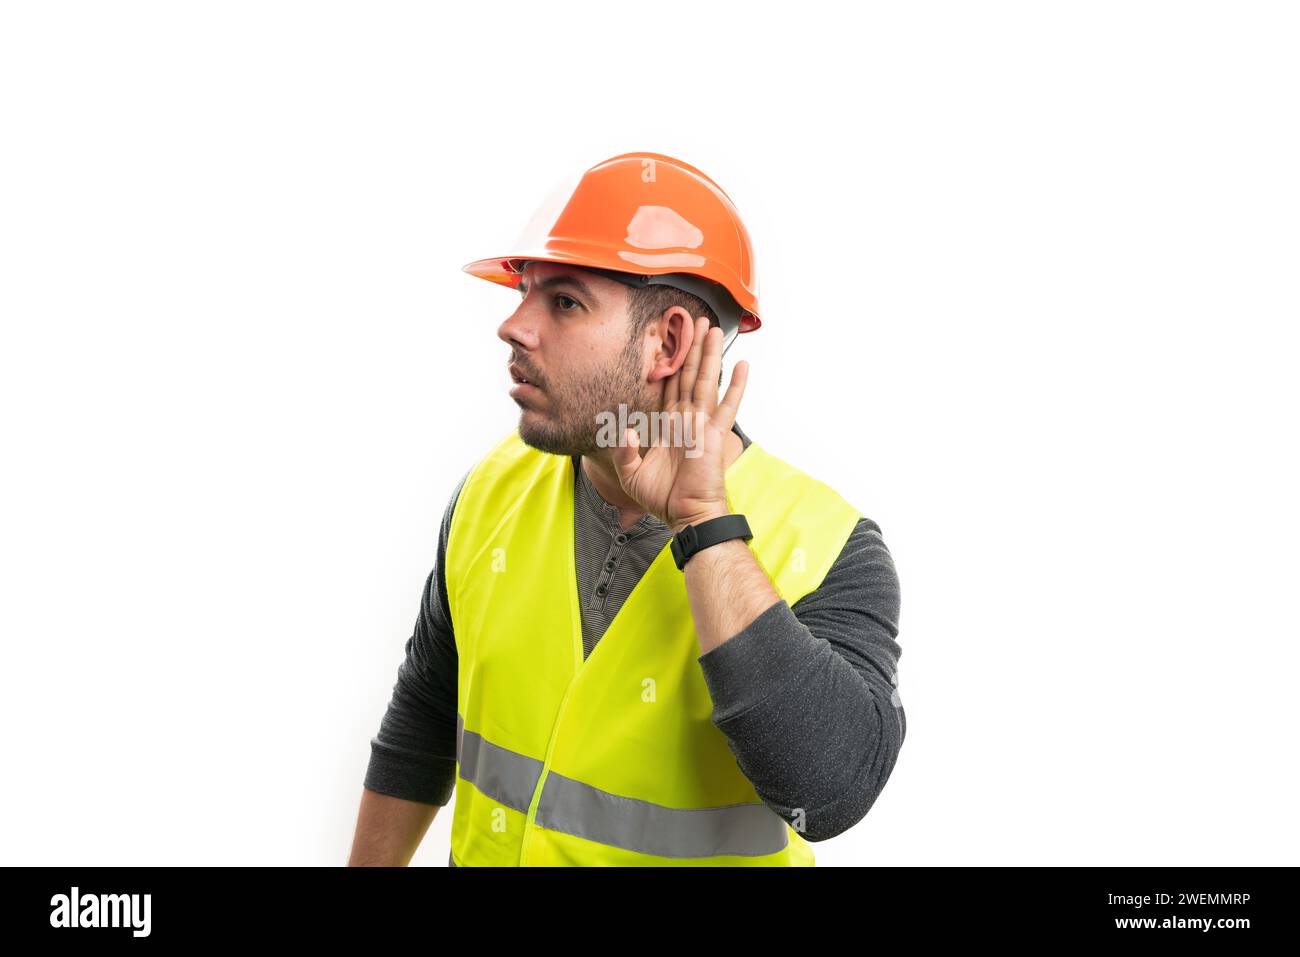 Adult model as curious male builder making listening secret eavesdropping gesture with hand to ear isolated on white studio background Stock Photo